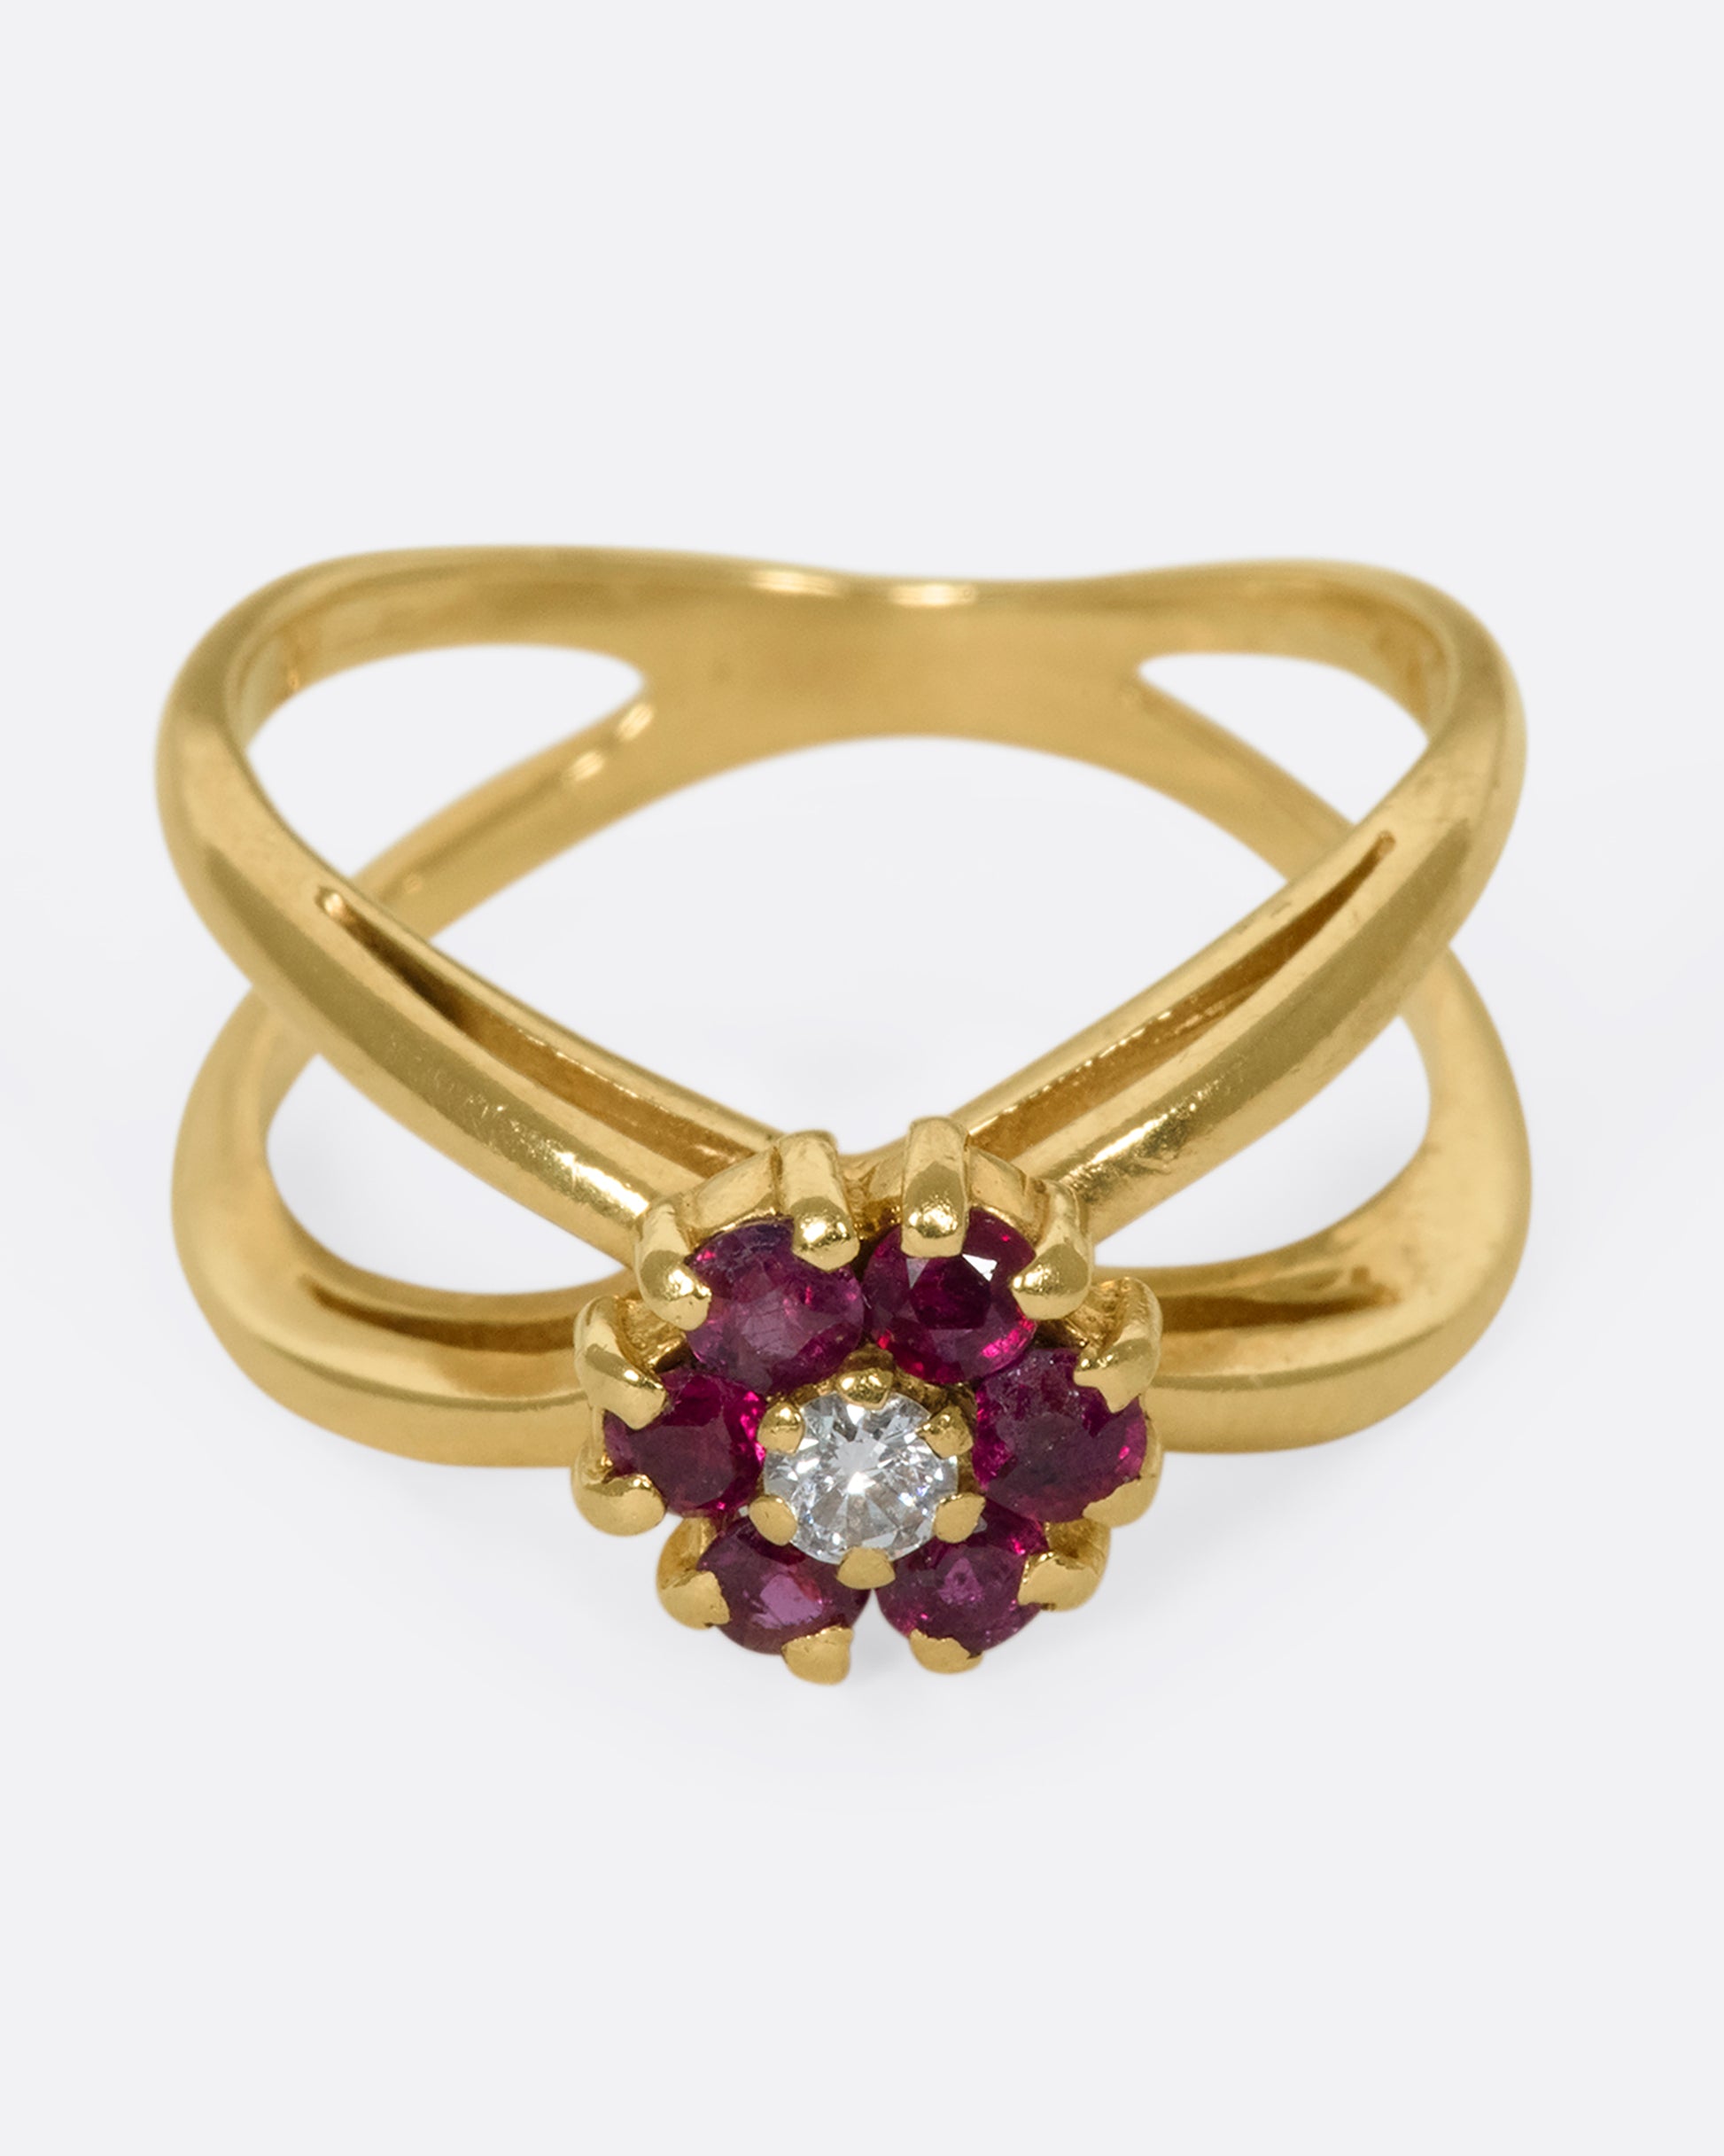 A slightly overhead view of a yellow gold double banded ring with a ruby and diamond flower in the center.